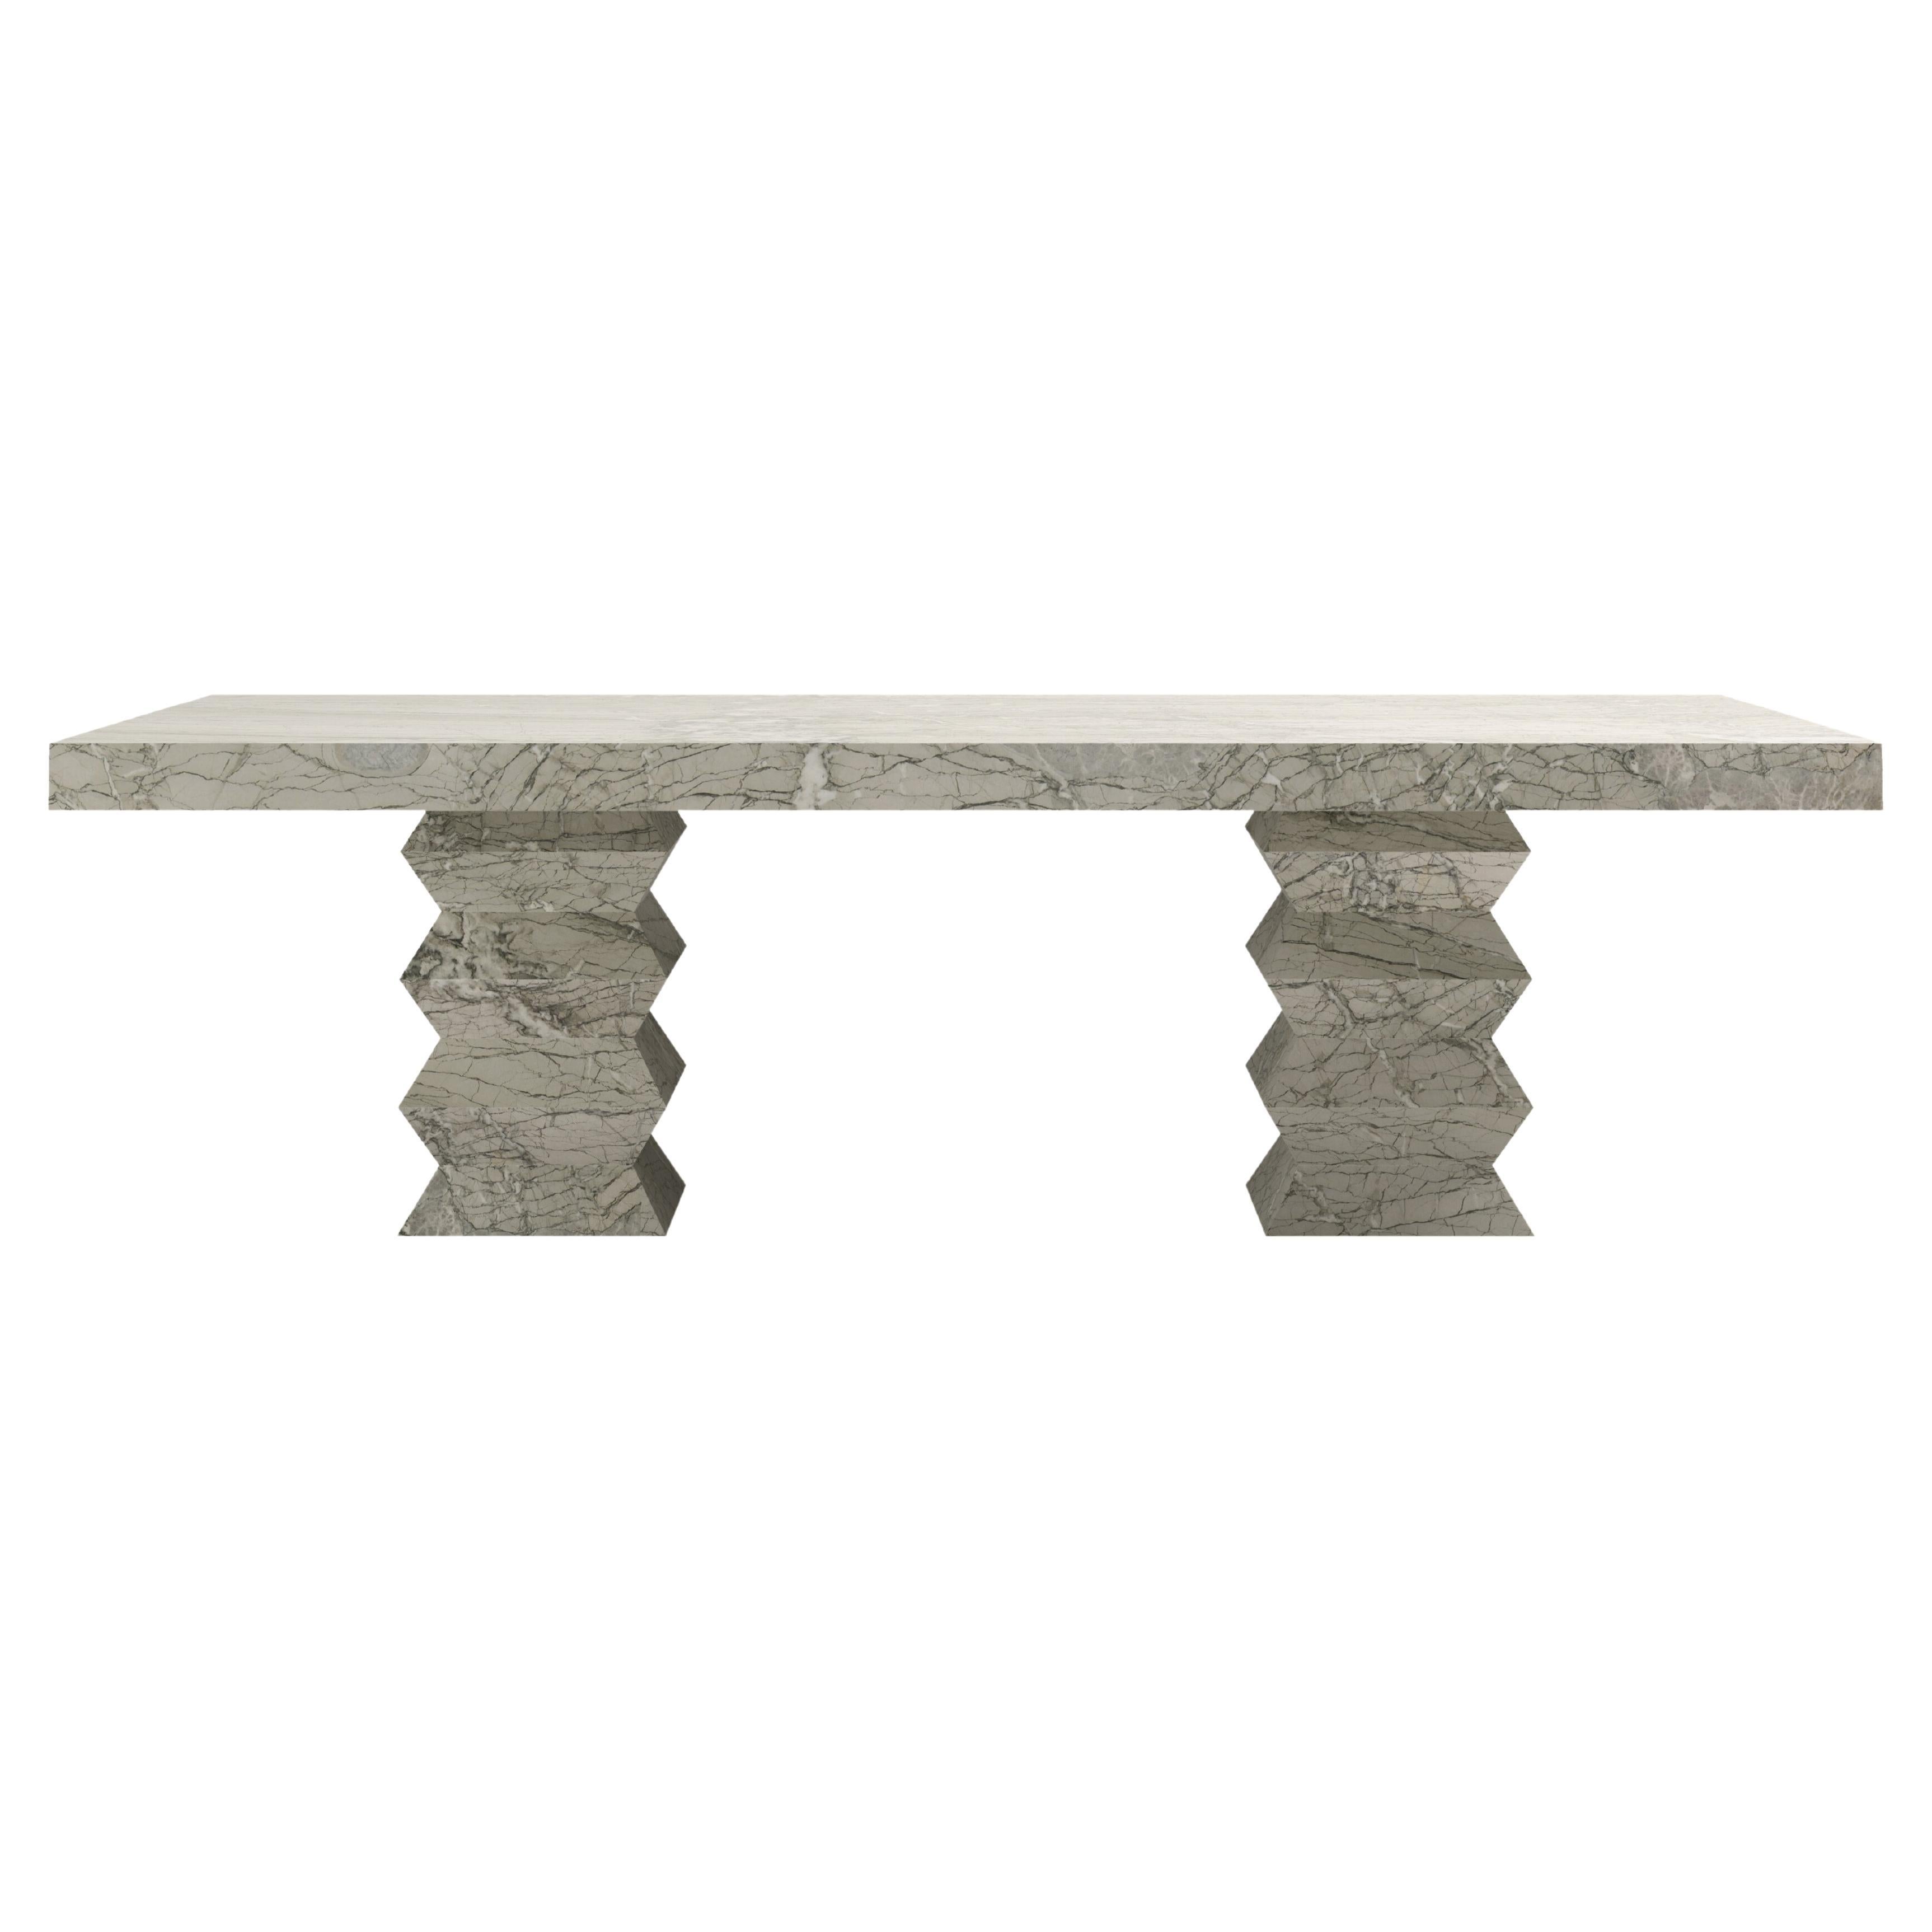 FORM(LA) Grinza Rectangle Dining Table 84"L x 42"W x 32"H Verde Antigua Marble For Sale